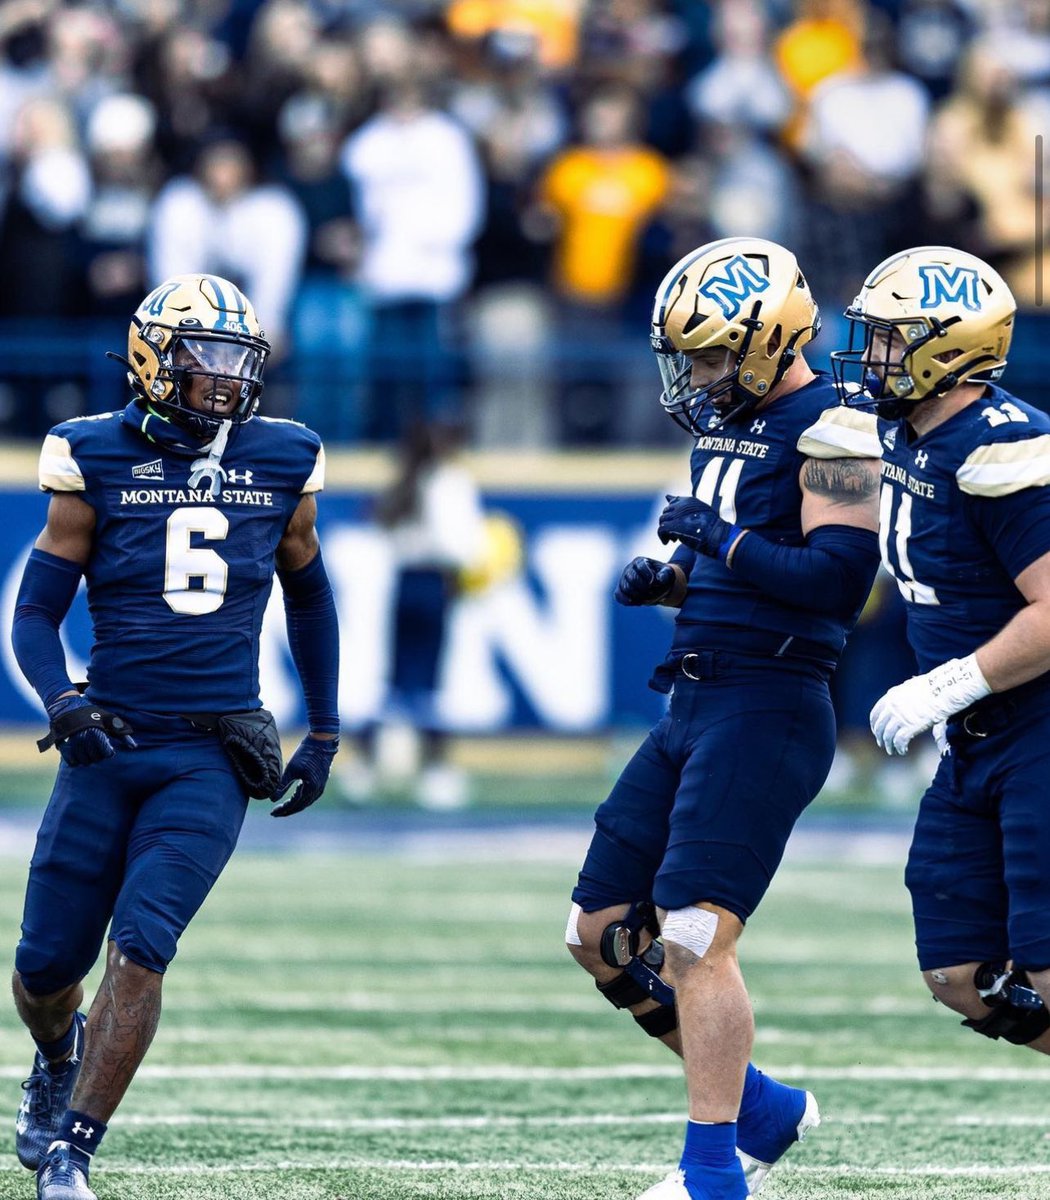 #AGTG! After a amazing conversation with @CoachBap I am blessed to receive a D1 offer from Montana State University! @CoachPatKennedy @coach_bourquin @coach_jayOh23 @coachjnewt @Coach_AlJohnson